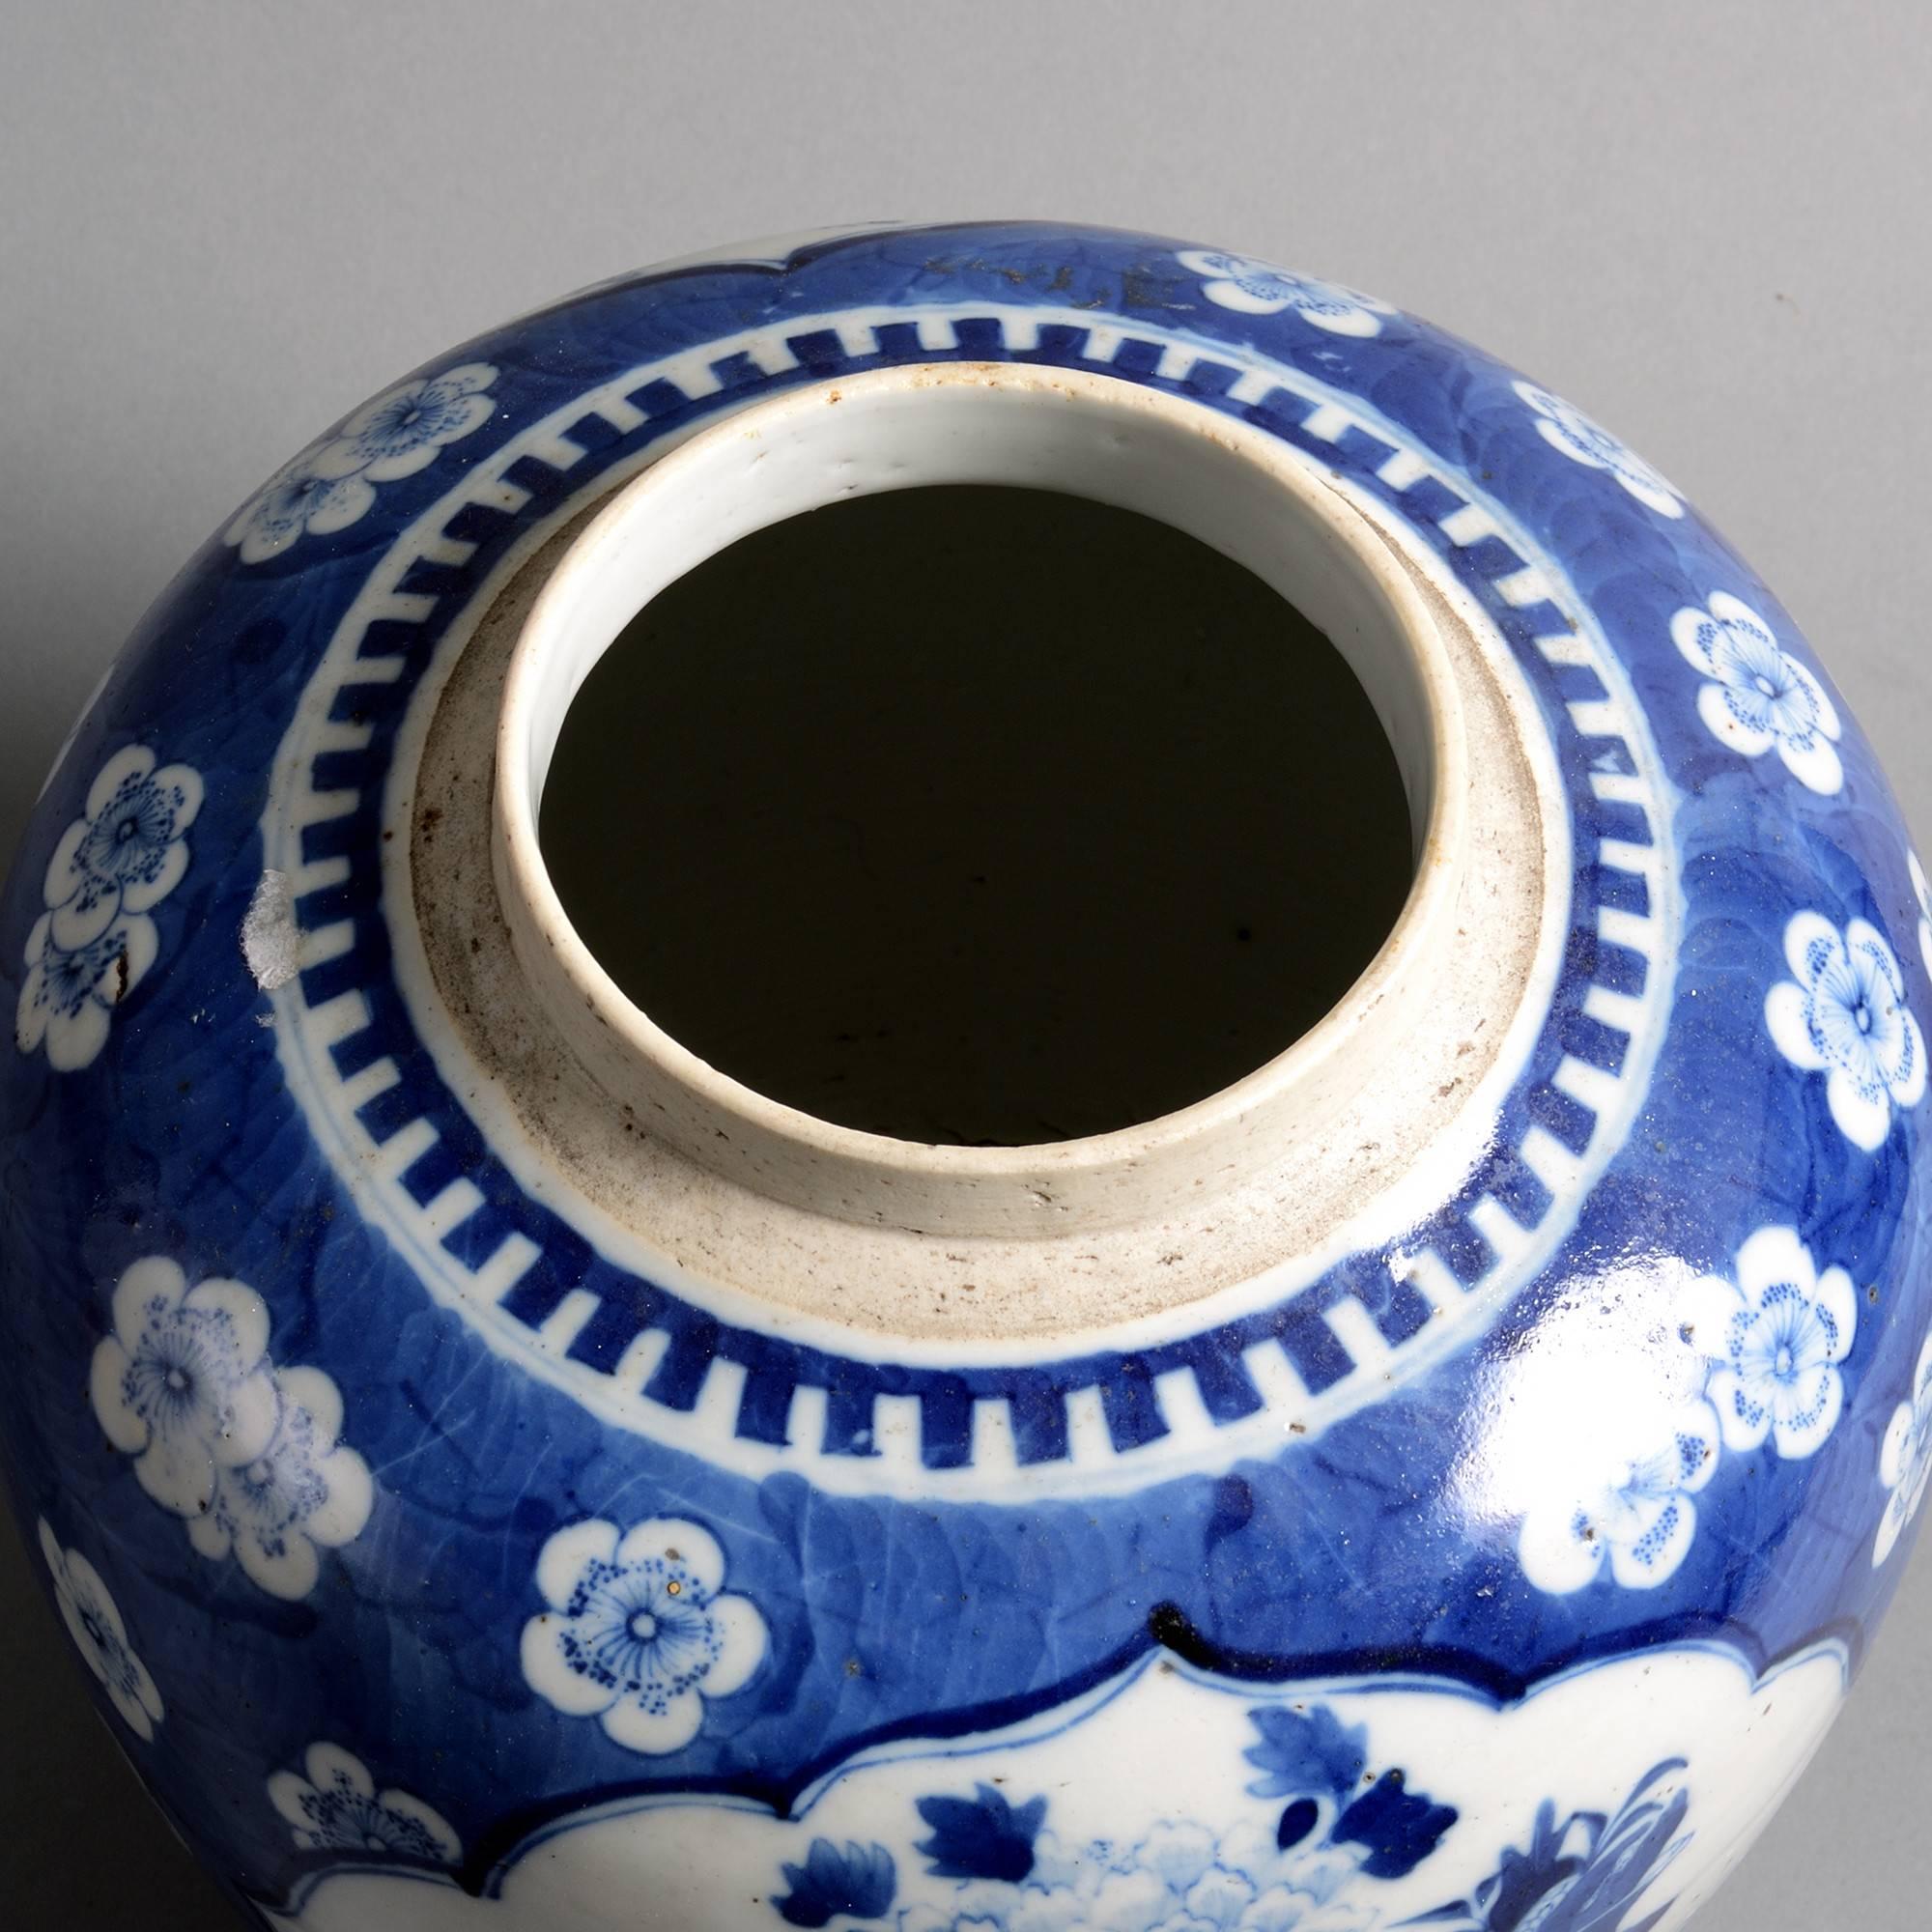 Chinese 19th Century Blue and White Porcelain Jar